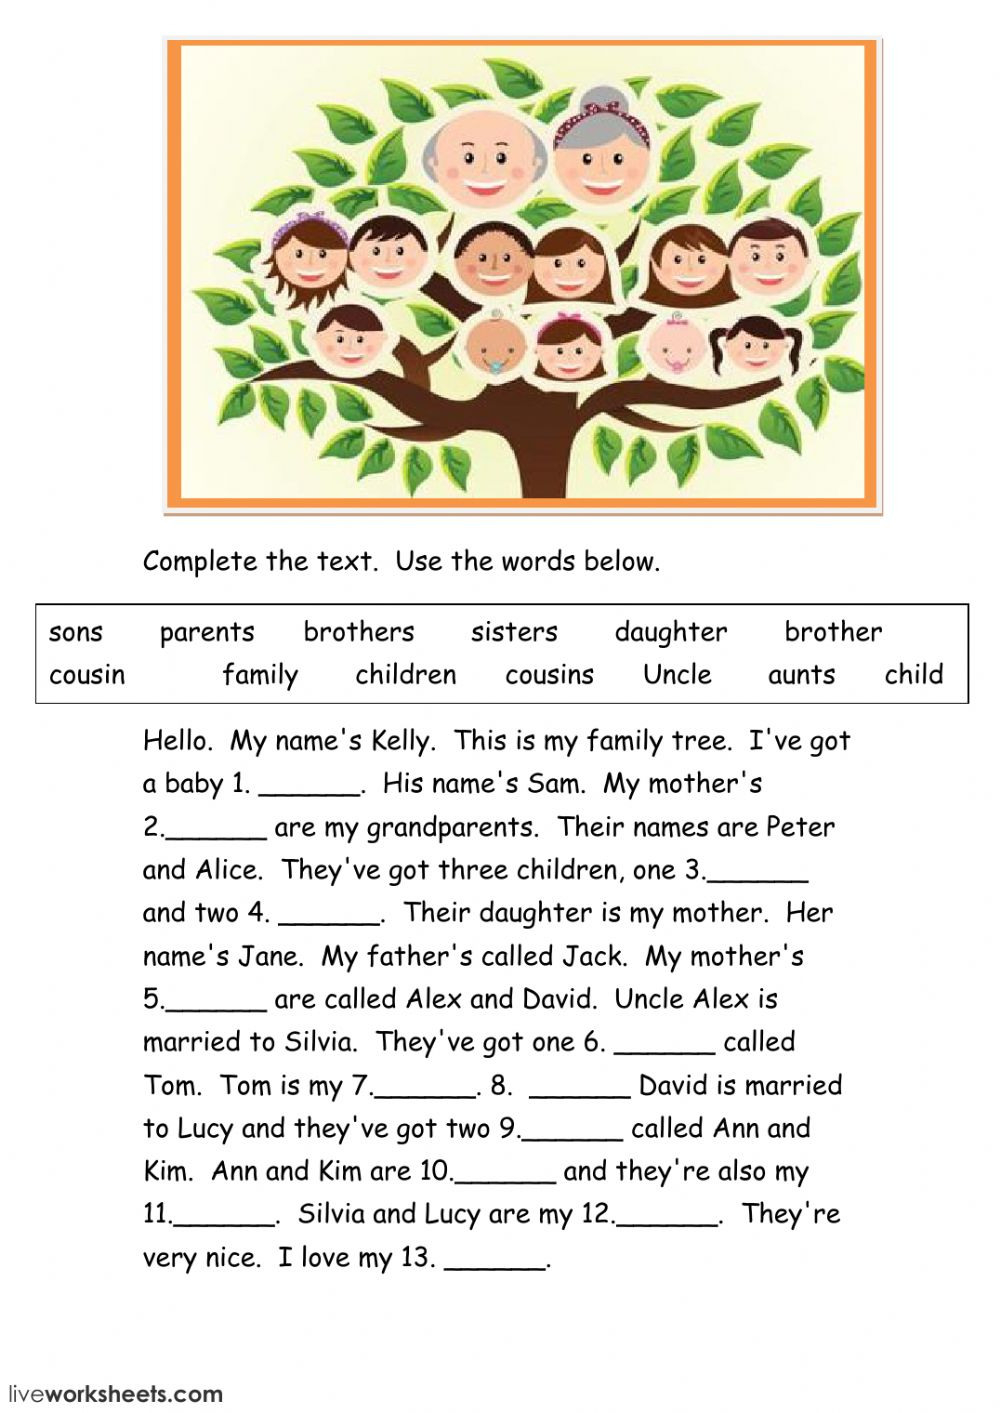 Spanish Family Tree Worksheet Answers | db-excel.com